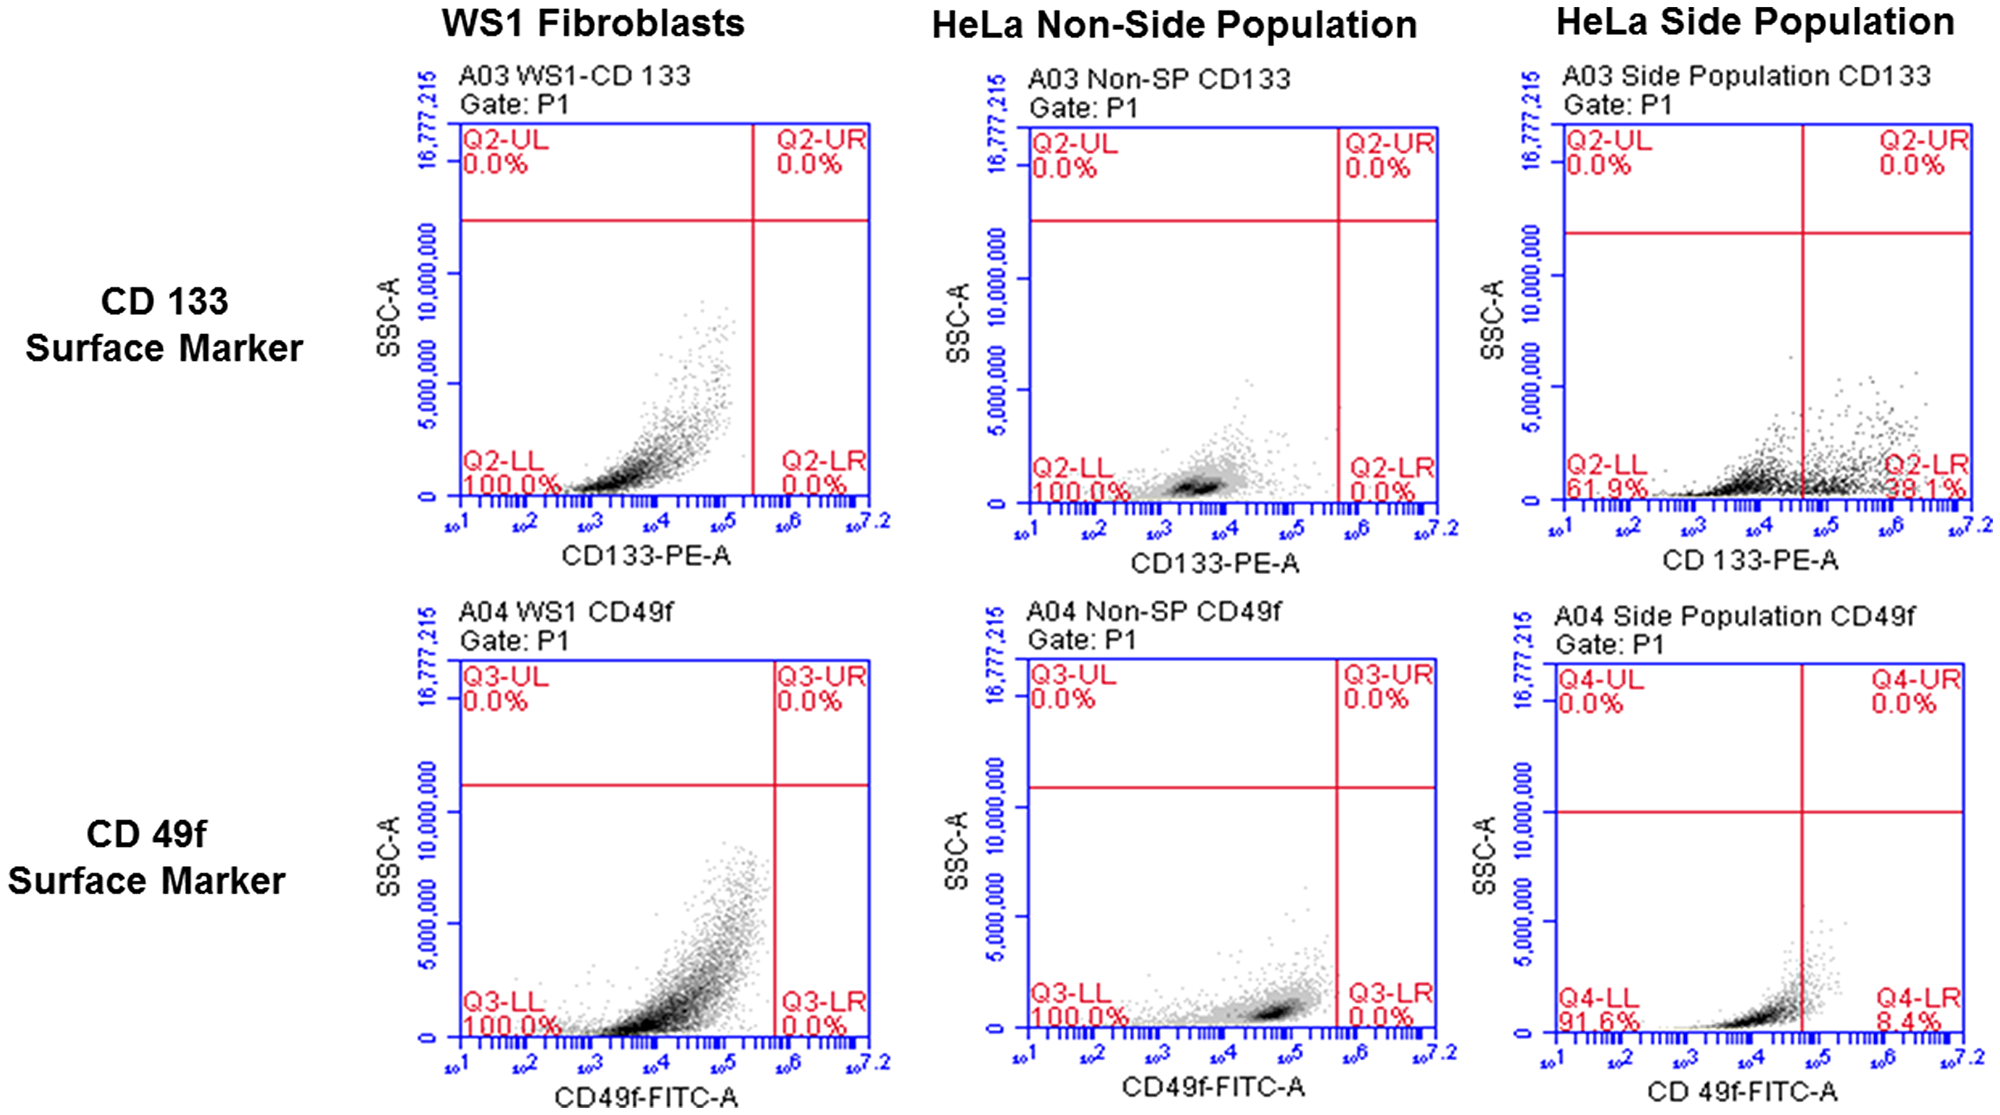 Flow cytometric analysis of cervical side population cells showing surface markers with 38.1% positive for CD133 and 8.4% positive of CD49f. The non-side population as well as the negative control, WS1 fibroblast were negative for both markers.